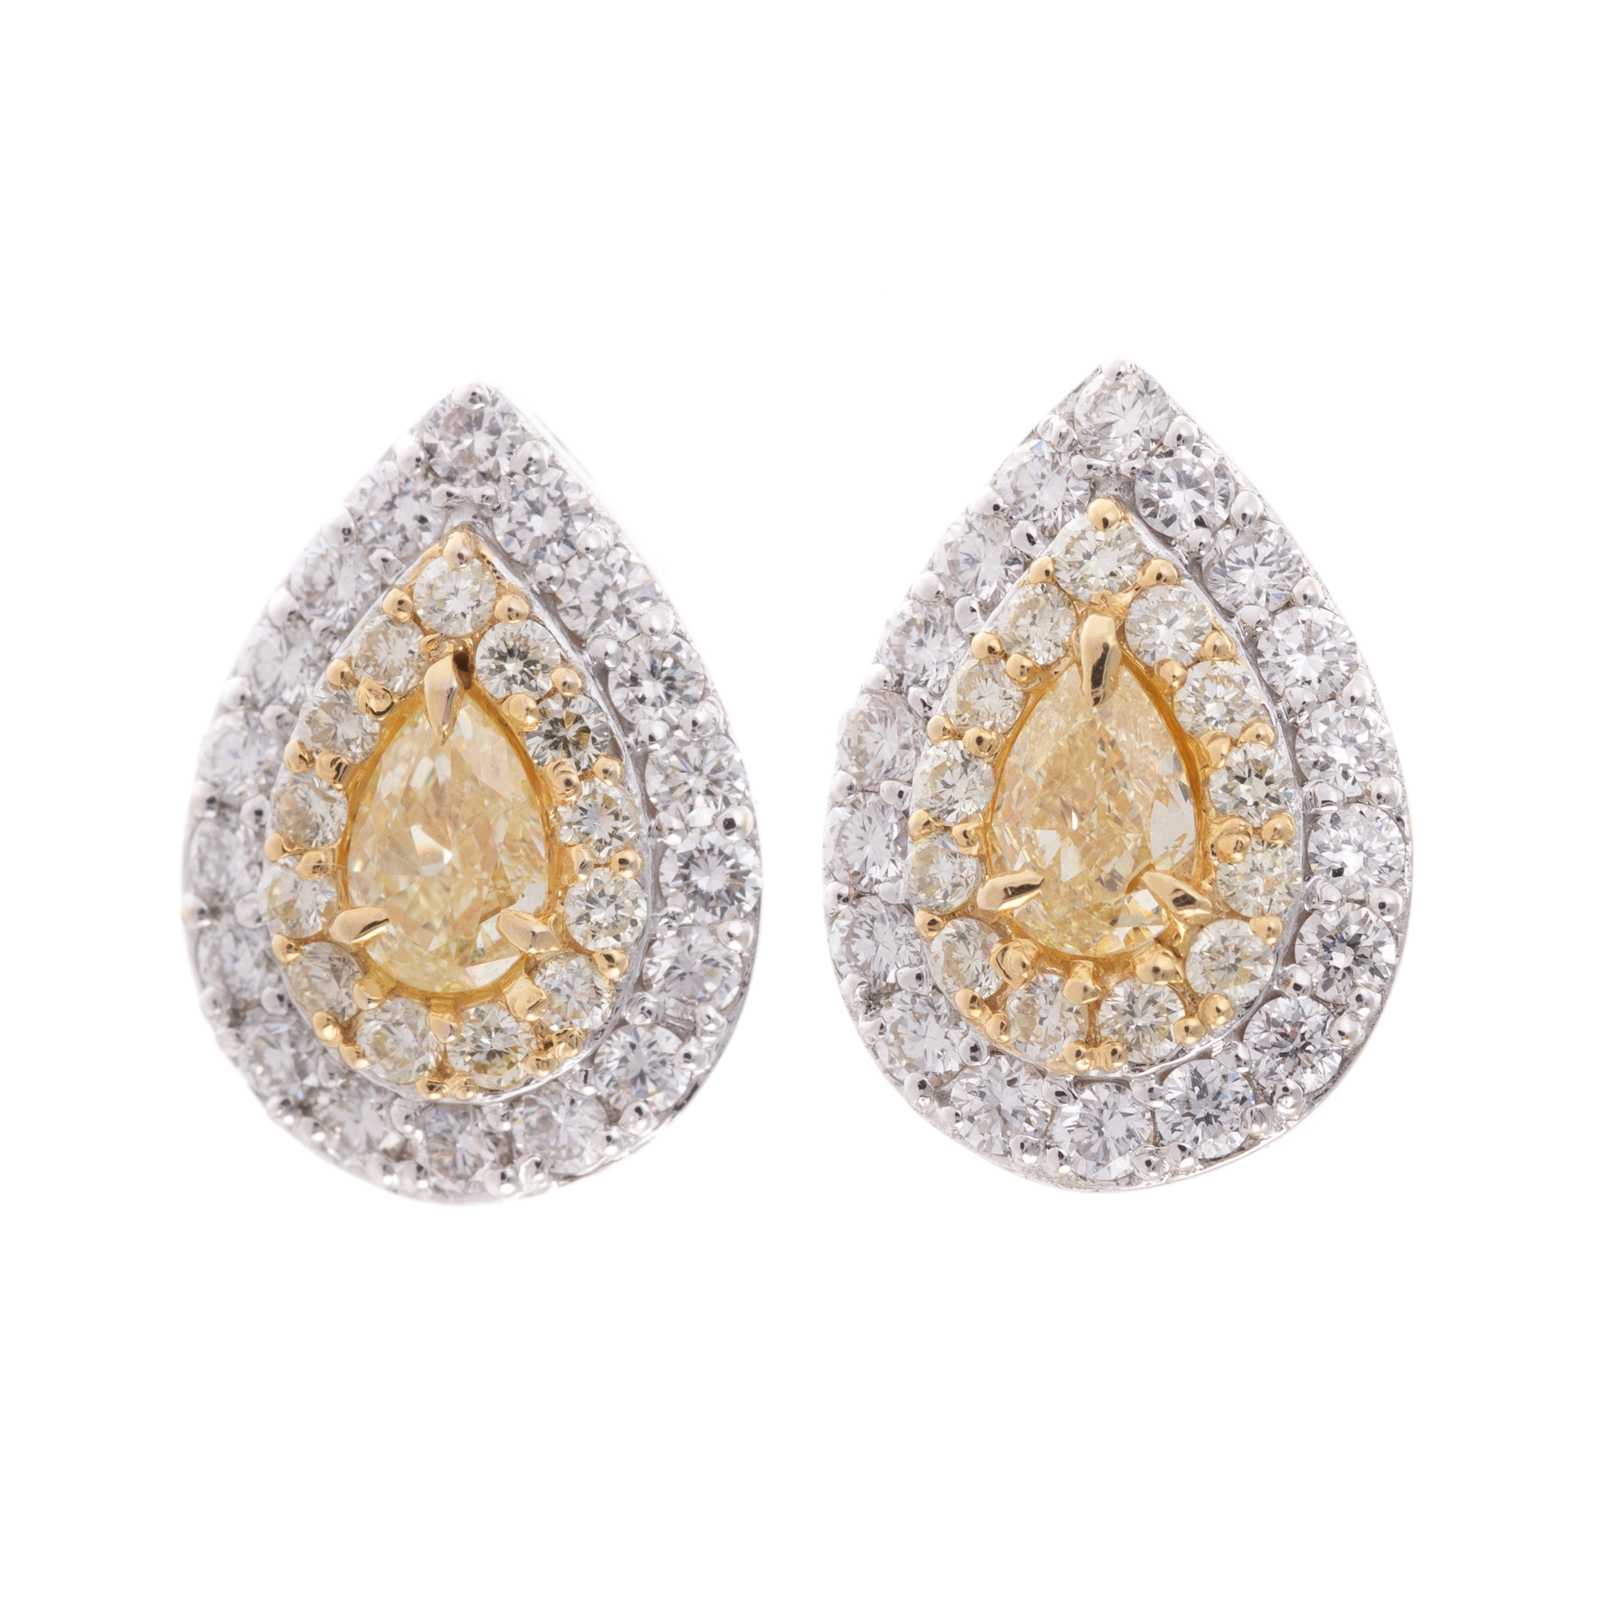 A PAIR OF 18K PEAR SHAPE YELLOW